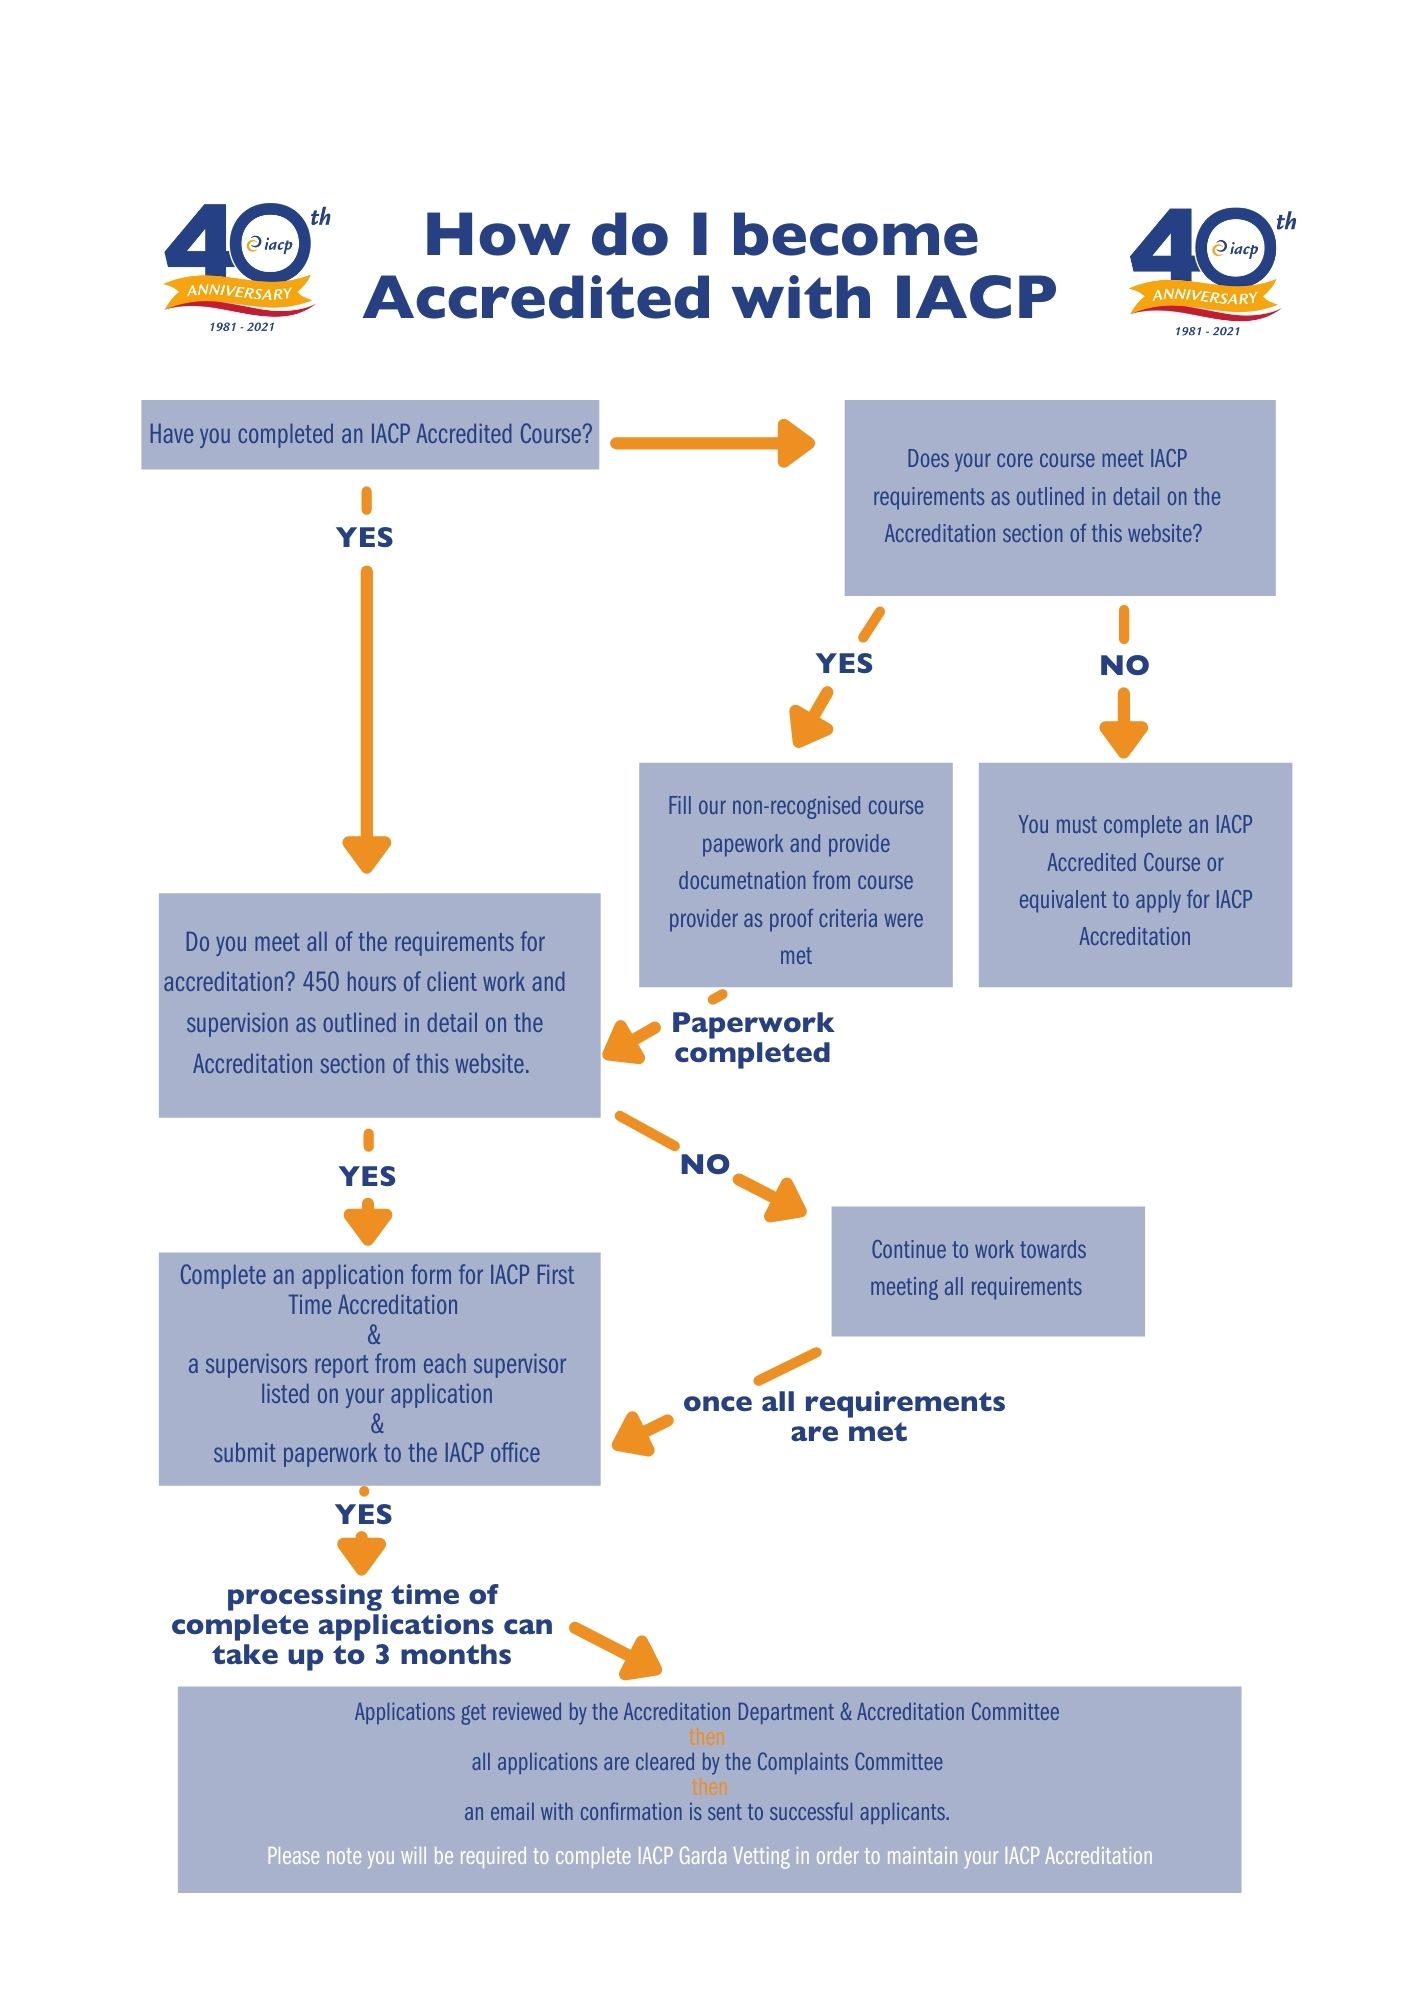 Becoming a member of the IACP